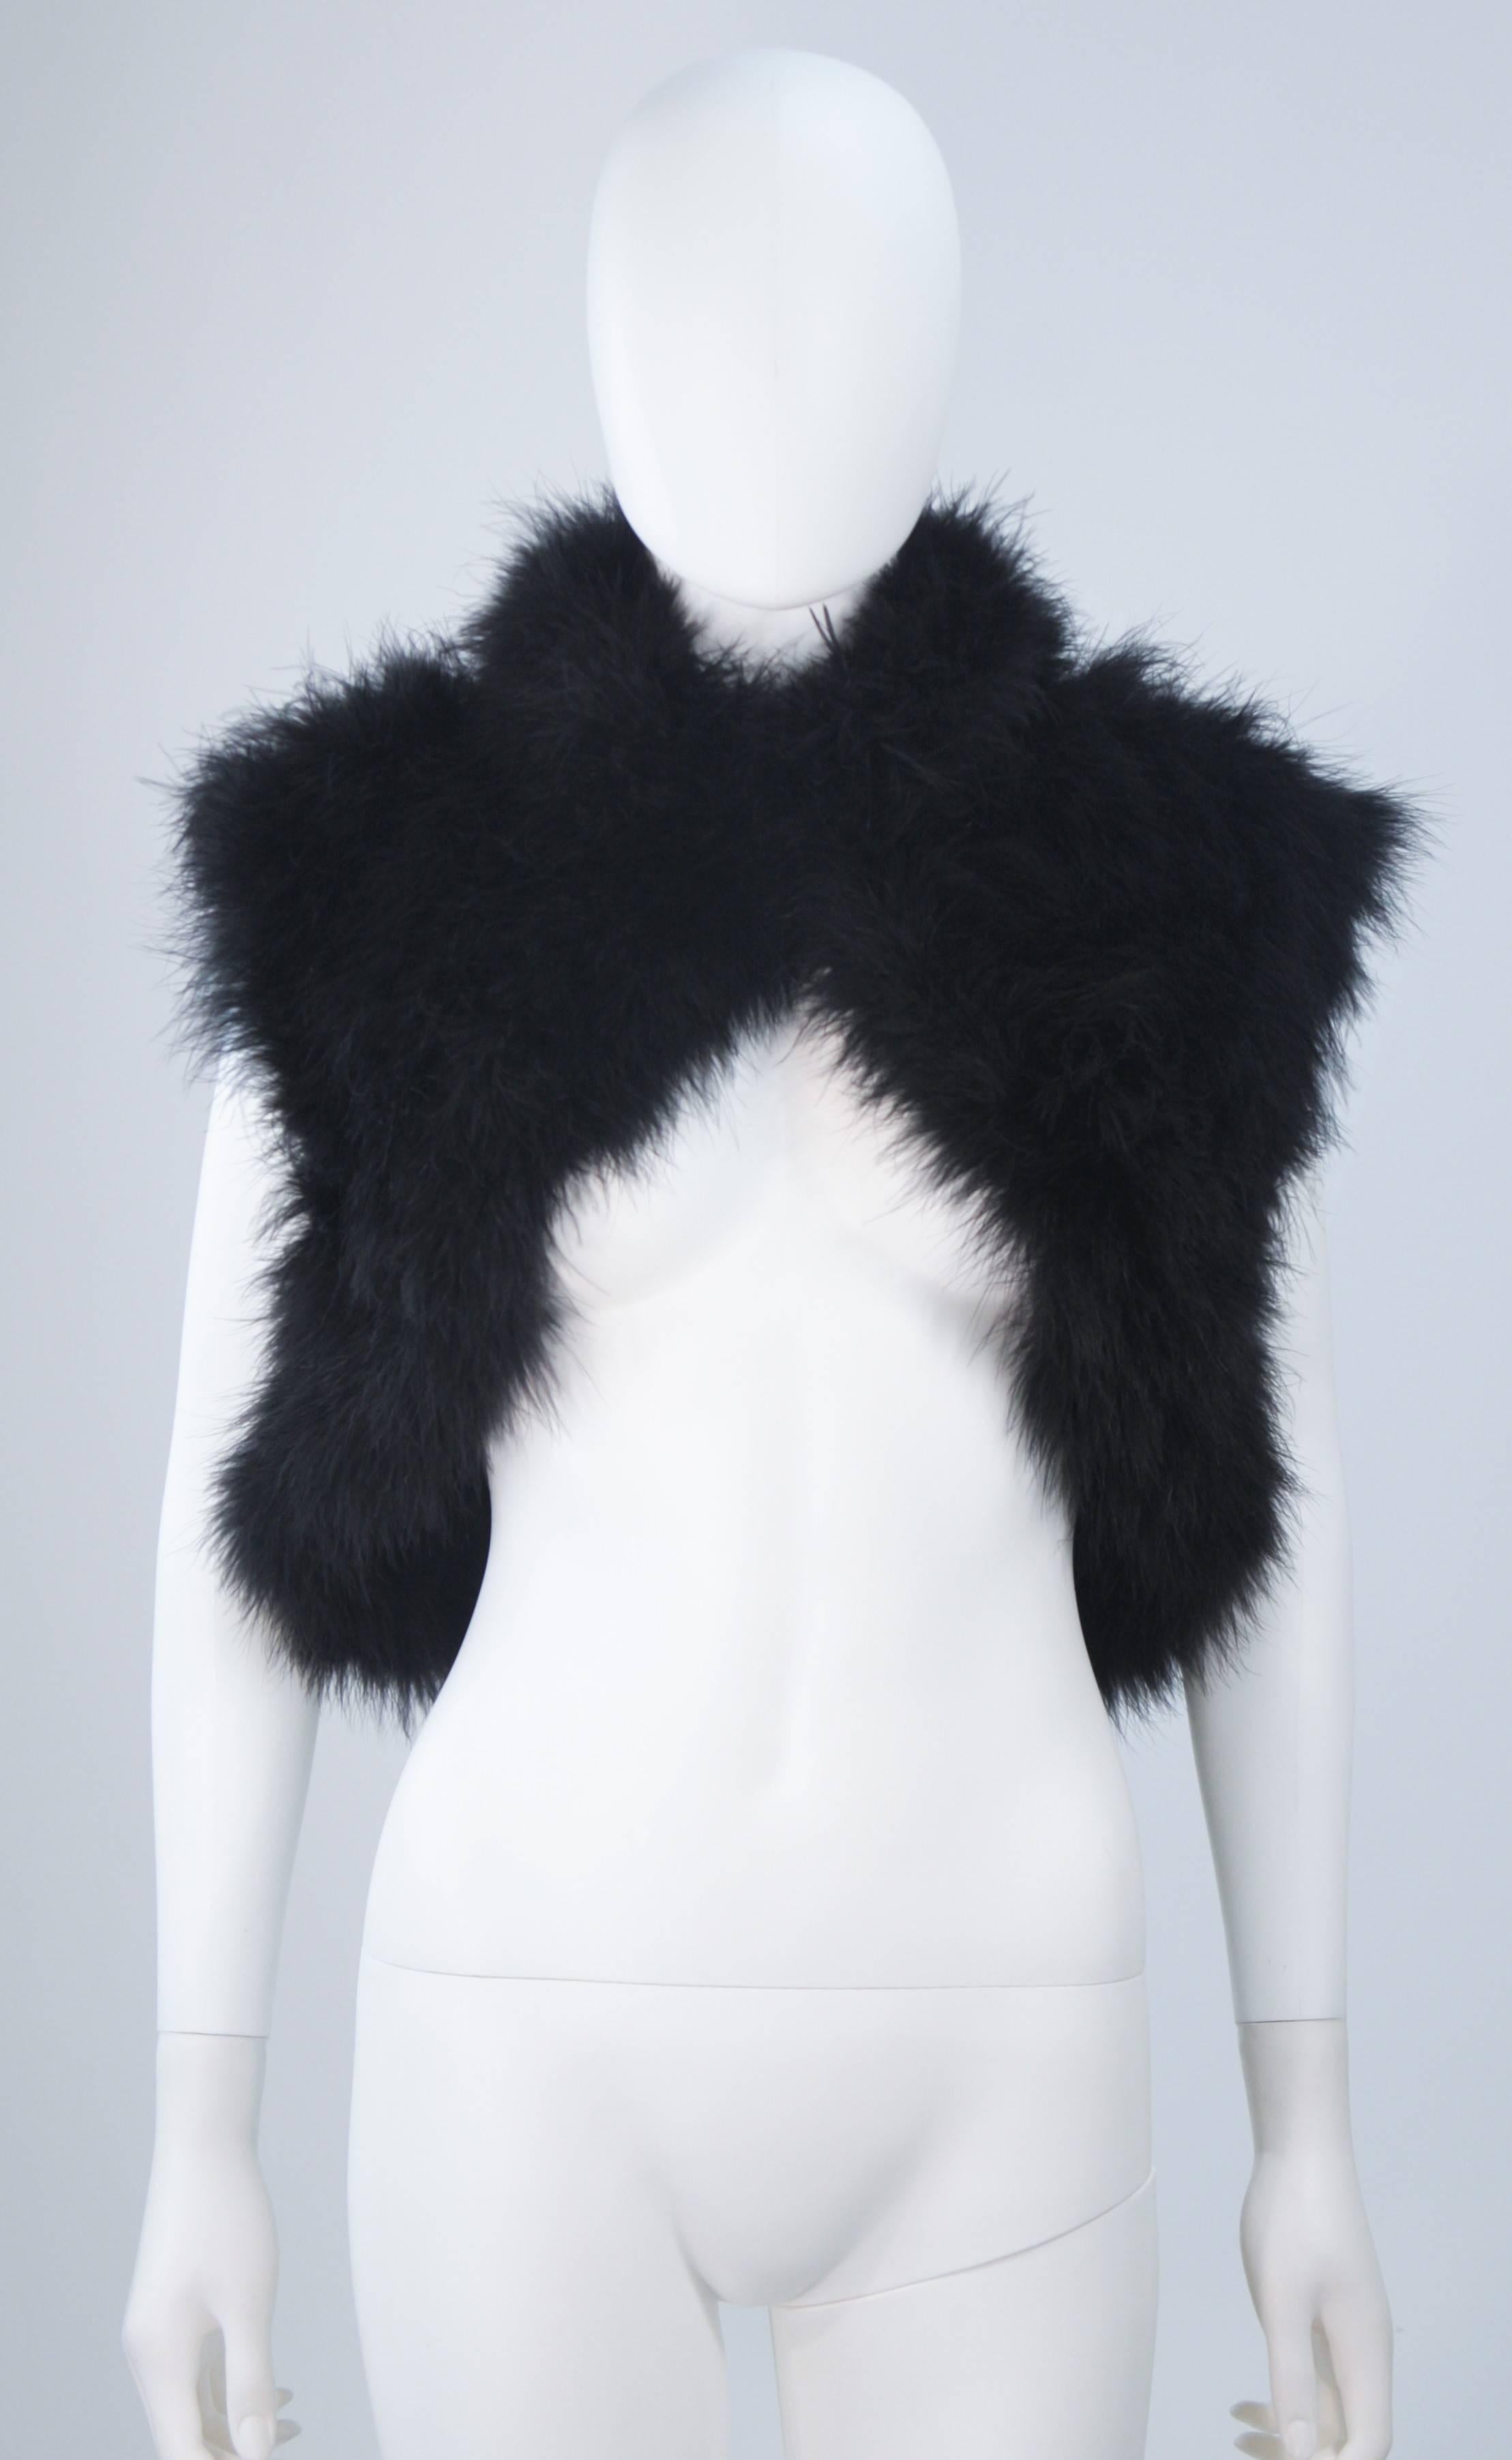 This Elizabeth Mason Couture Marabou garment is composed of a superiorly supple marabou in a stunning black hue. Features a hook and eye closure. Designed in Beverly Hills.

This is a couture custom order. Please allow for a 60 day lead time from